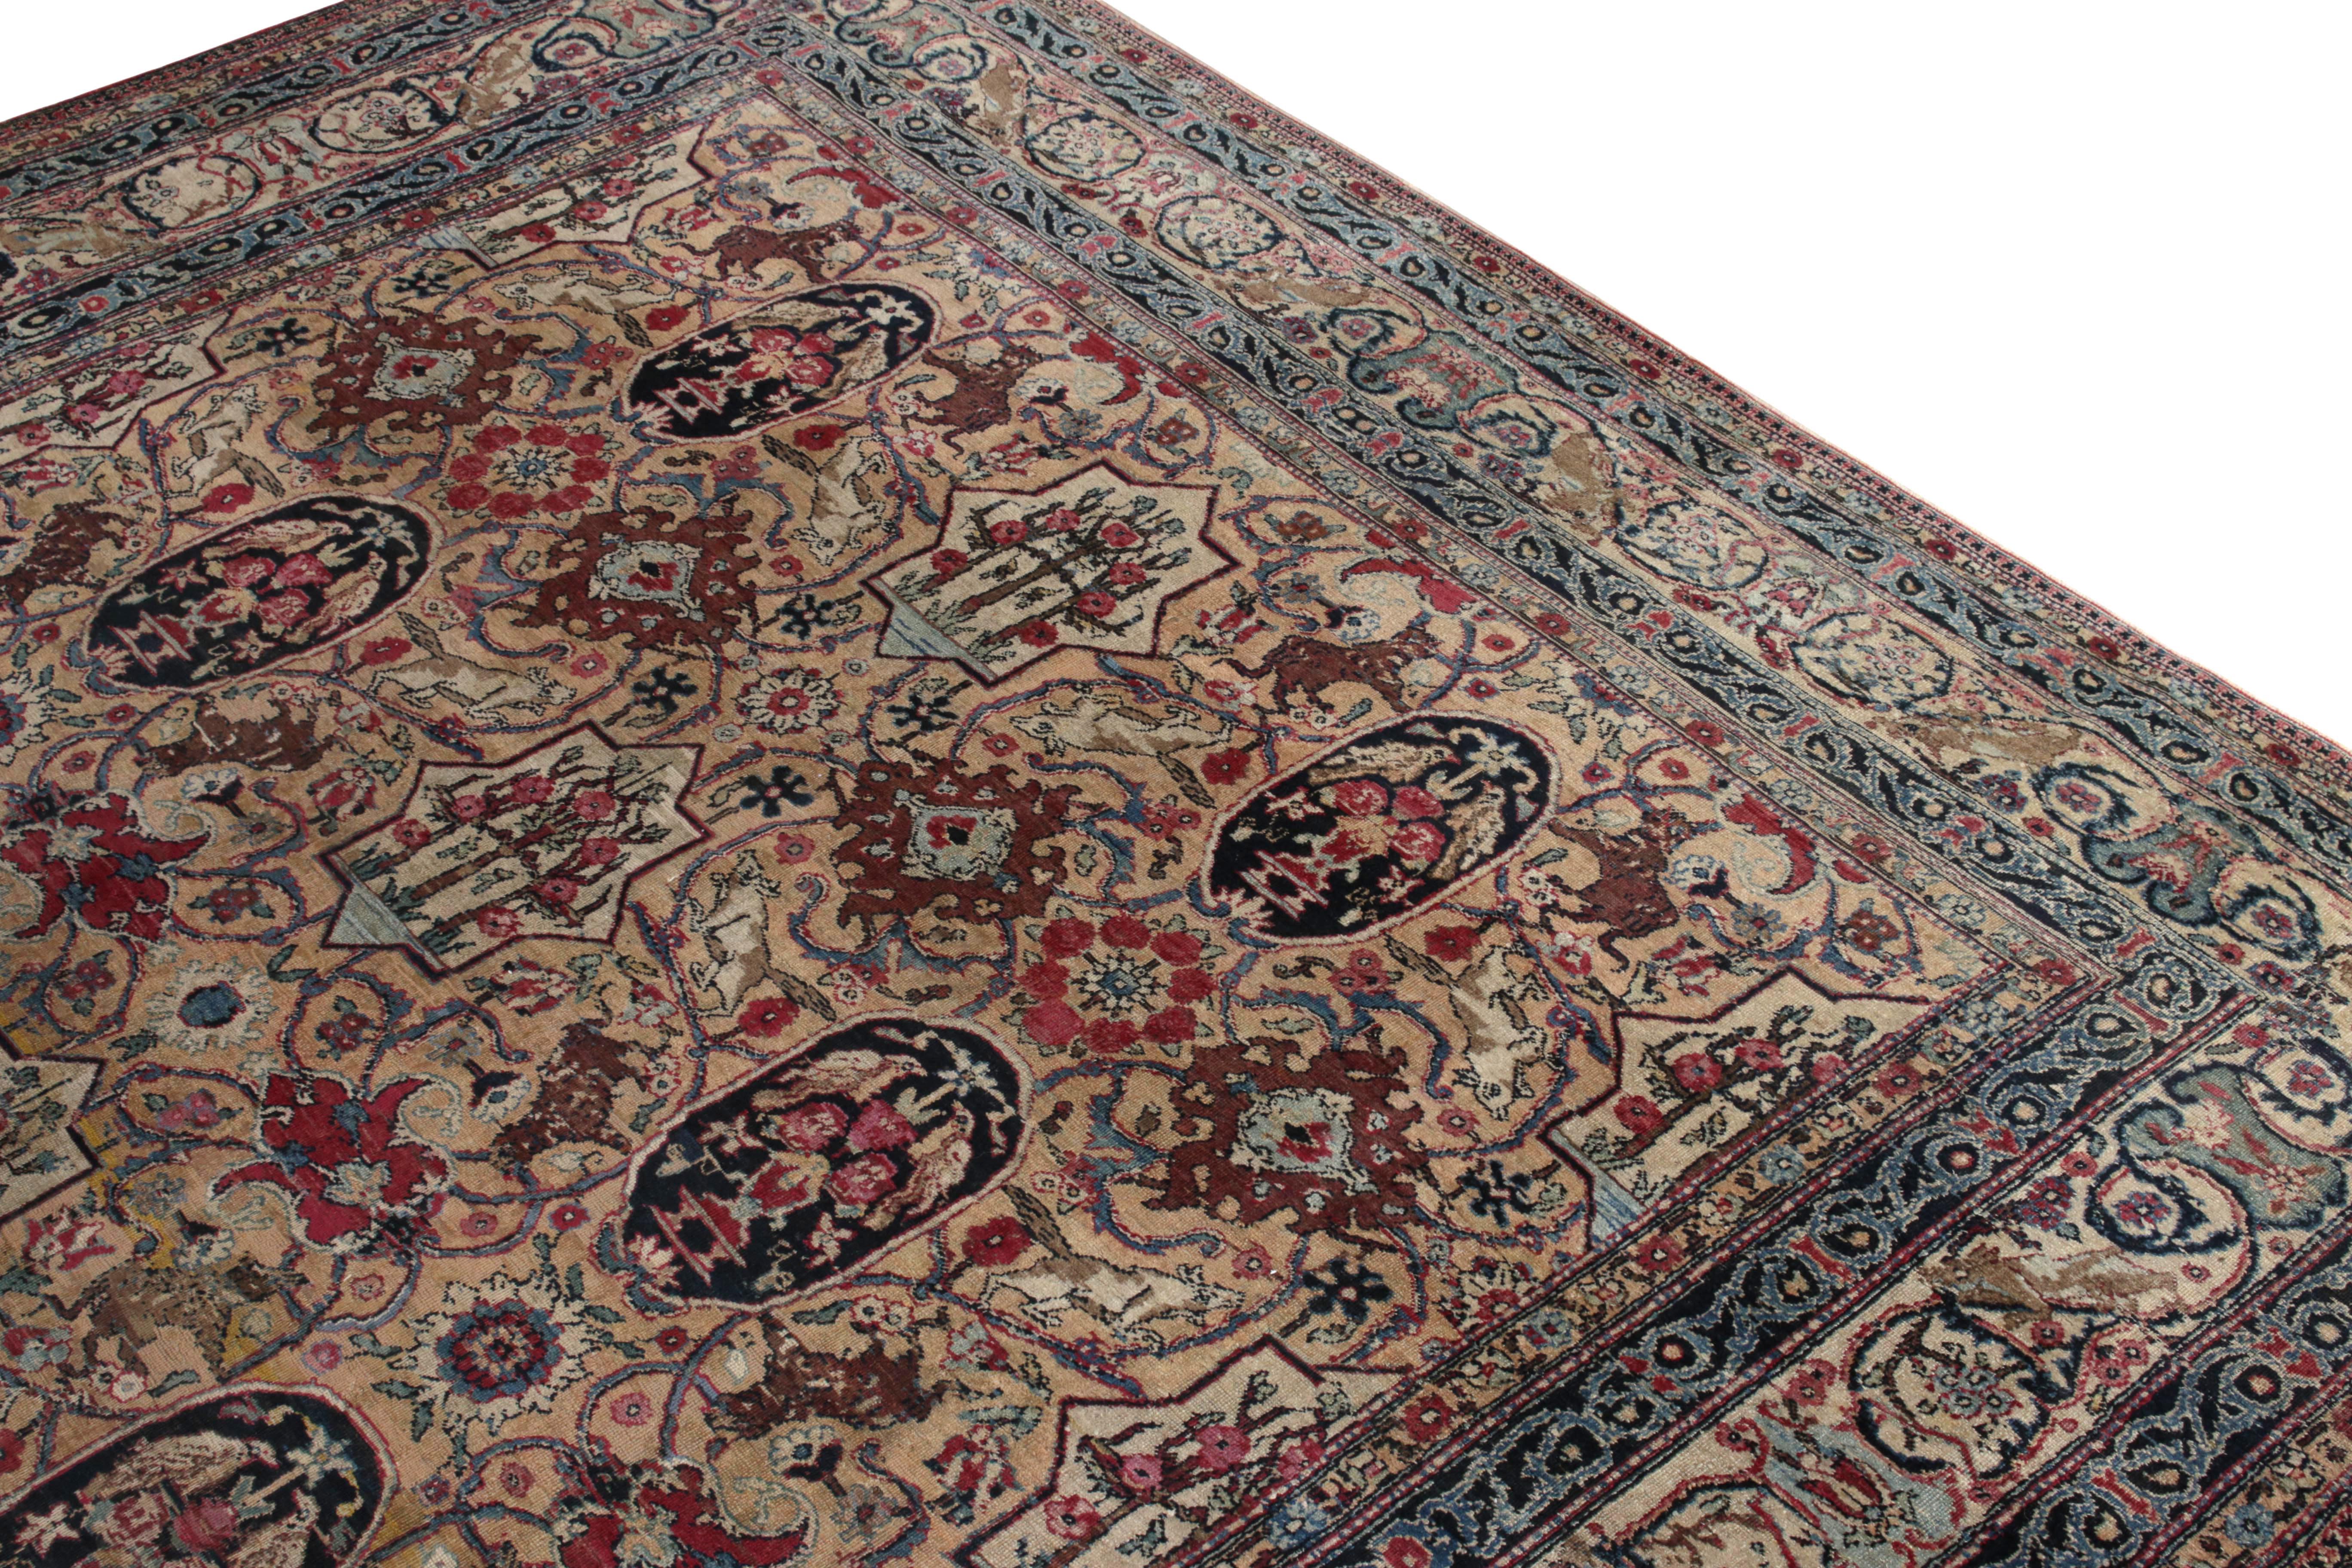 Antique Tehranian Persian rug in Royal Blue, Wine & Beige Floral by Rug & Kilim In Good Condition For Sale In Long Island City, NY